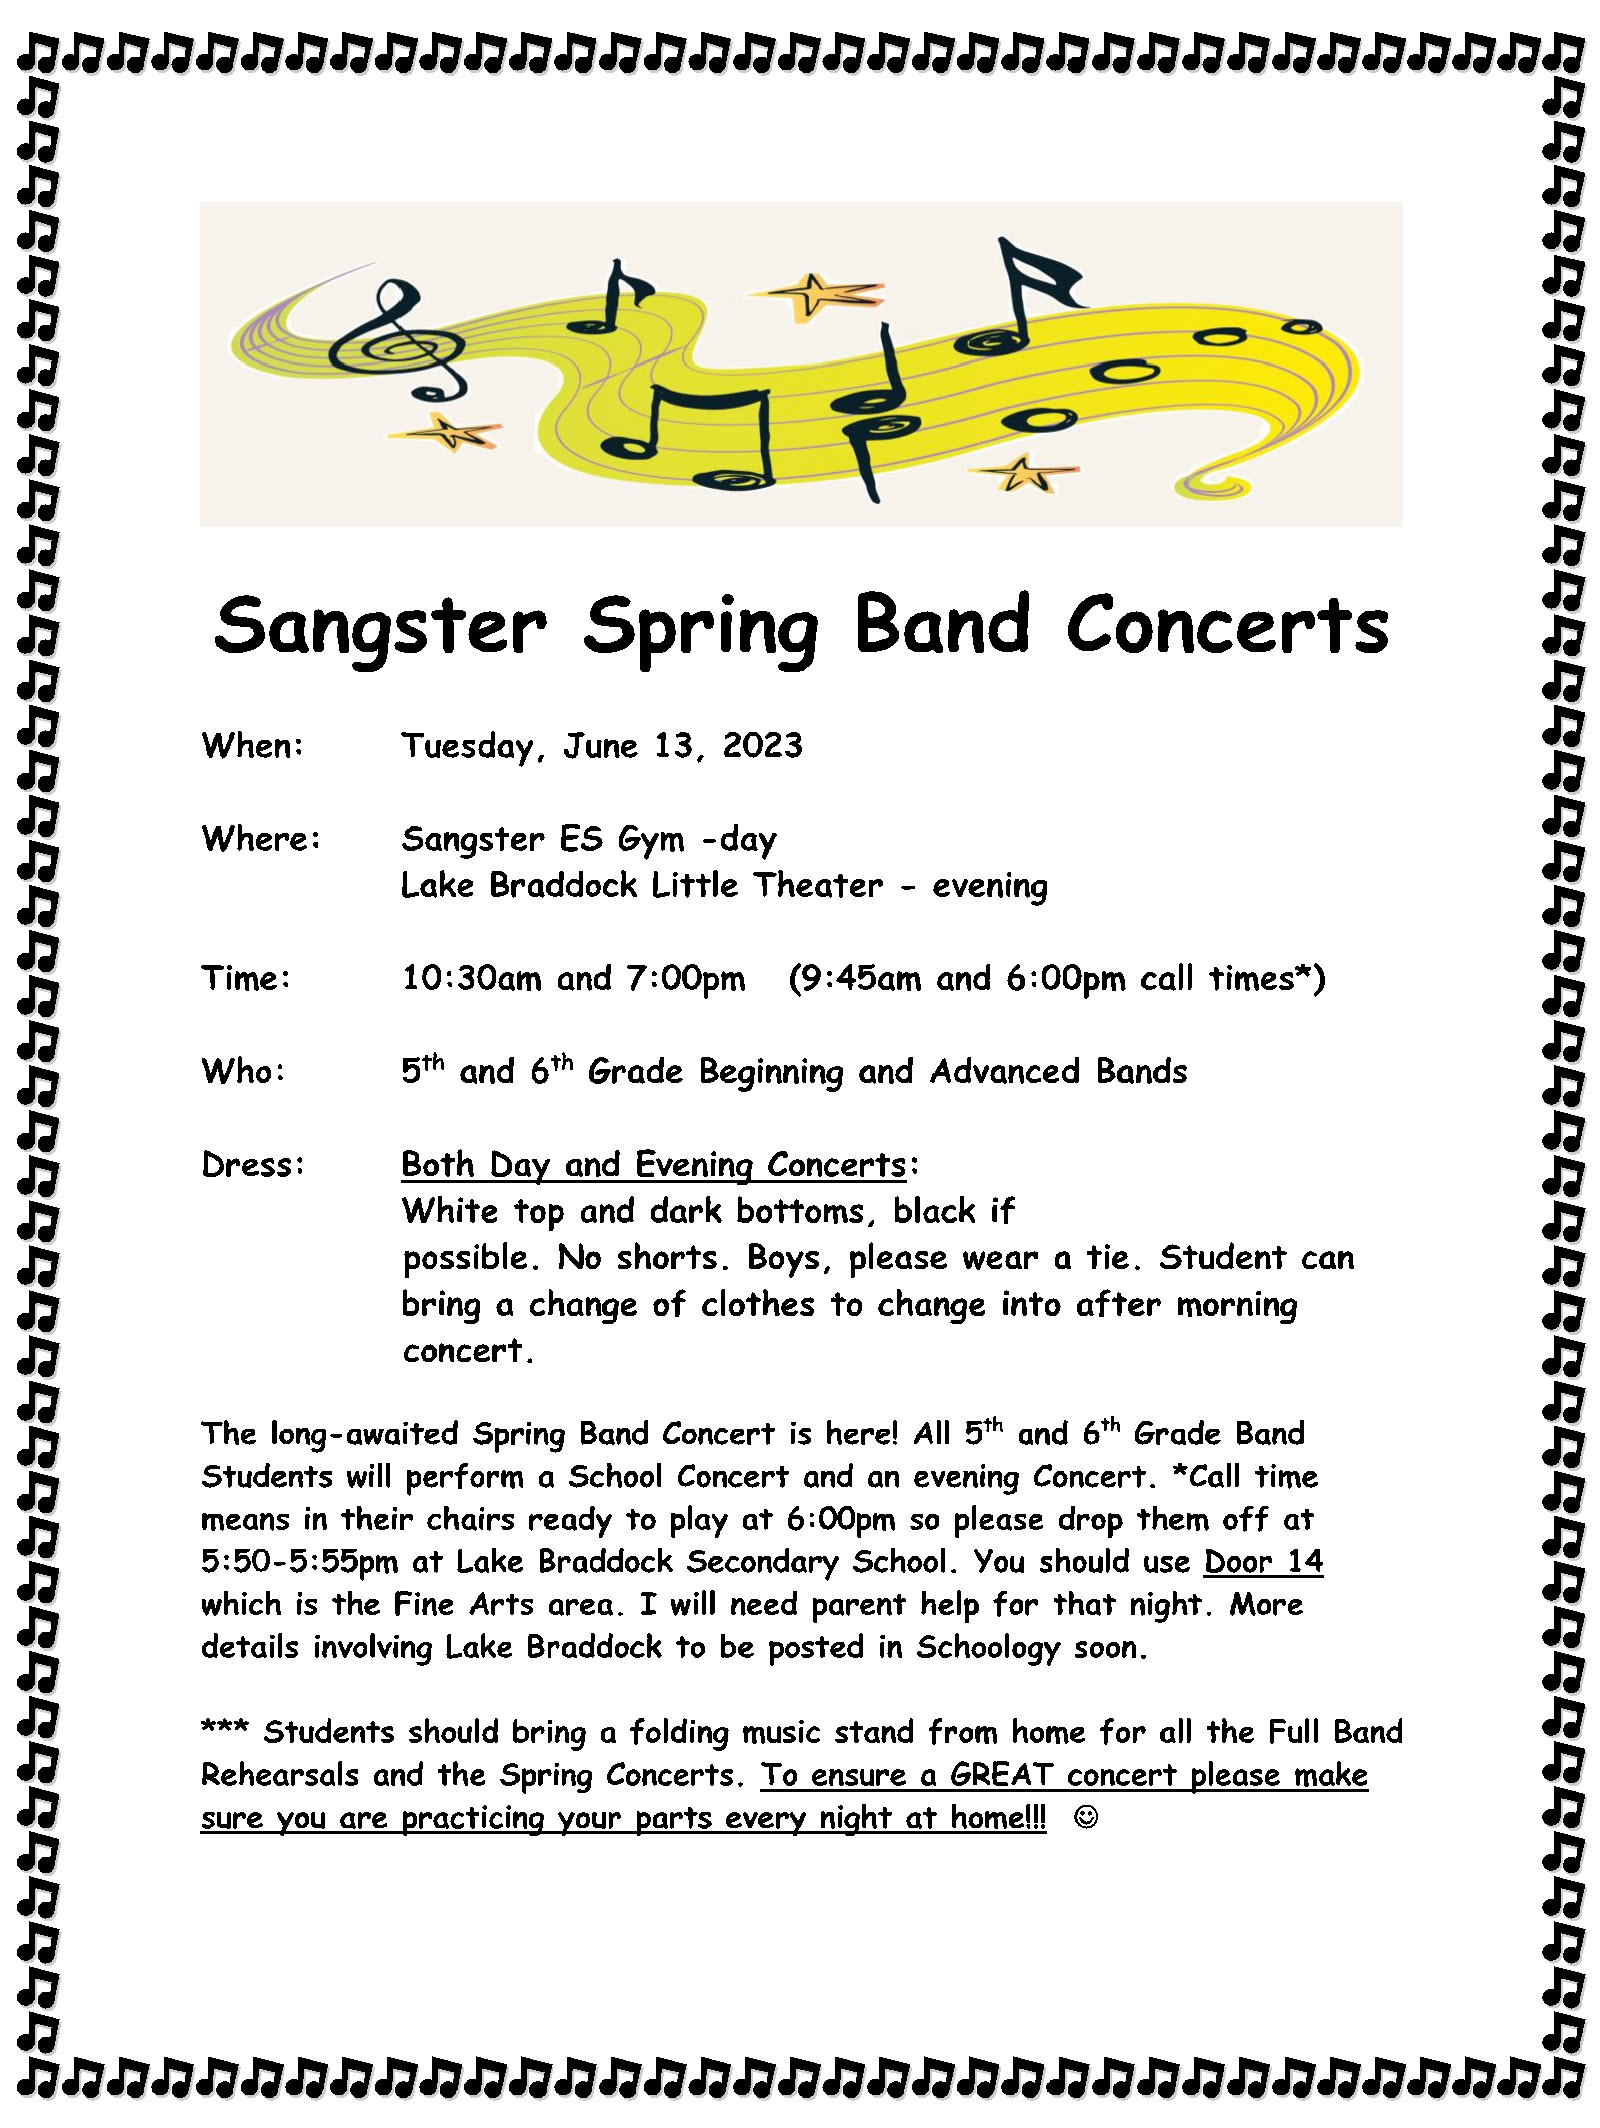 When: Tuesday, June 13, 2023 Where: Sangster ES Gym -day Lake Braddock Little Theater - evening Time: 10:30am and 7:00pm (9:45am and 6:00pm call times*) Who: 5 th and 6th Grade Beginning and Advanced Bands Dress: Both Day and Evening Concerts: White top and dark bottoms, black if  possible. No shorts. Boys, please wear a tie. Student can bring a change of clothes to change into after morning  concert. The long-awaited Spring Band Concert is here! All 5th and 6th Grade Band Students will perform a School Concert and an evening Concert. *Call time means in their chairs ready to play at 6:00pm so please drop them off at 5:50-5:55pm at Lake Braddock Secondary School. You should use Door 14 which is the Fine Arts area. I will need parent help for that night. More details involving Lake Braddock to be posted in Schoology soon. *** Students should bring a folding music stand from home for all the Full Band Rehearsals and the Spring Concerts. To ensure a GREAT concert please make sure you are practicing your parts every night at home!!! 